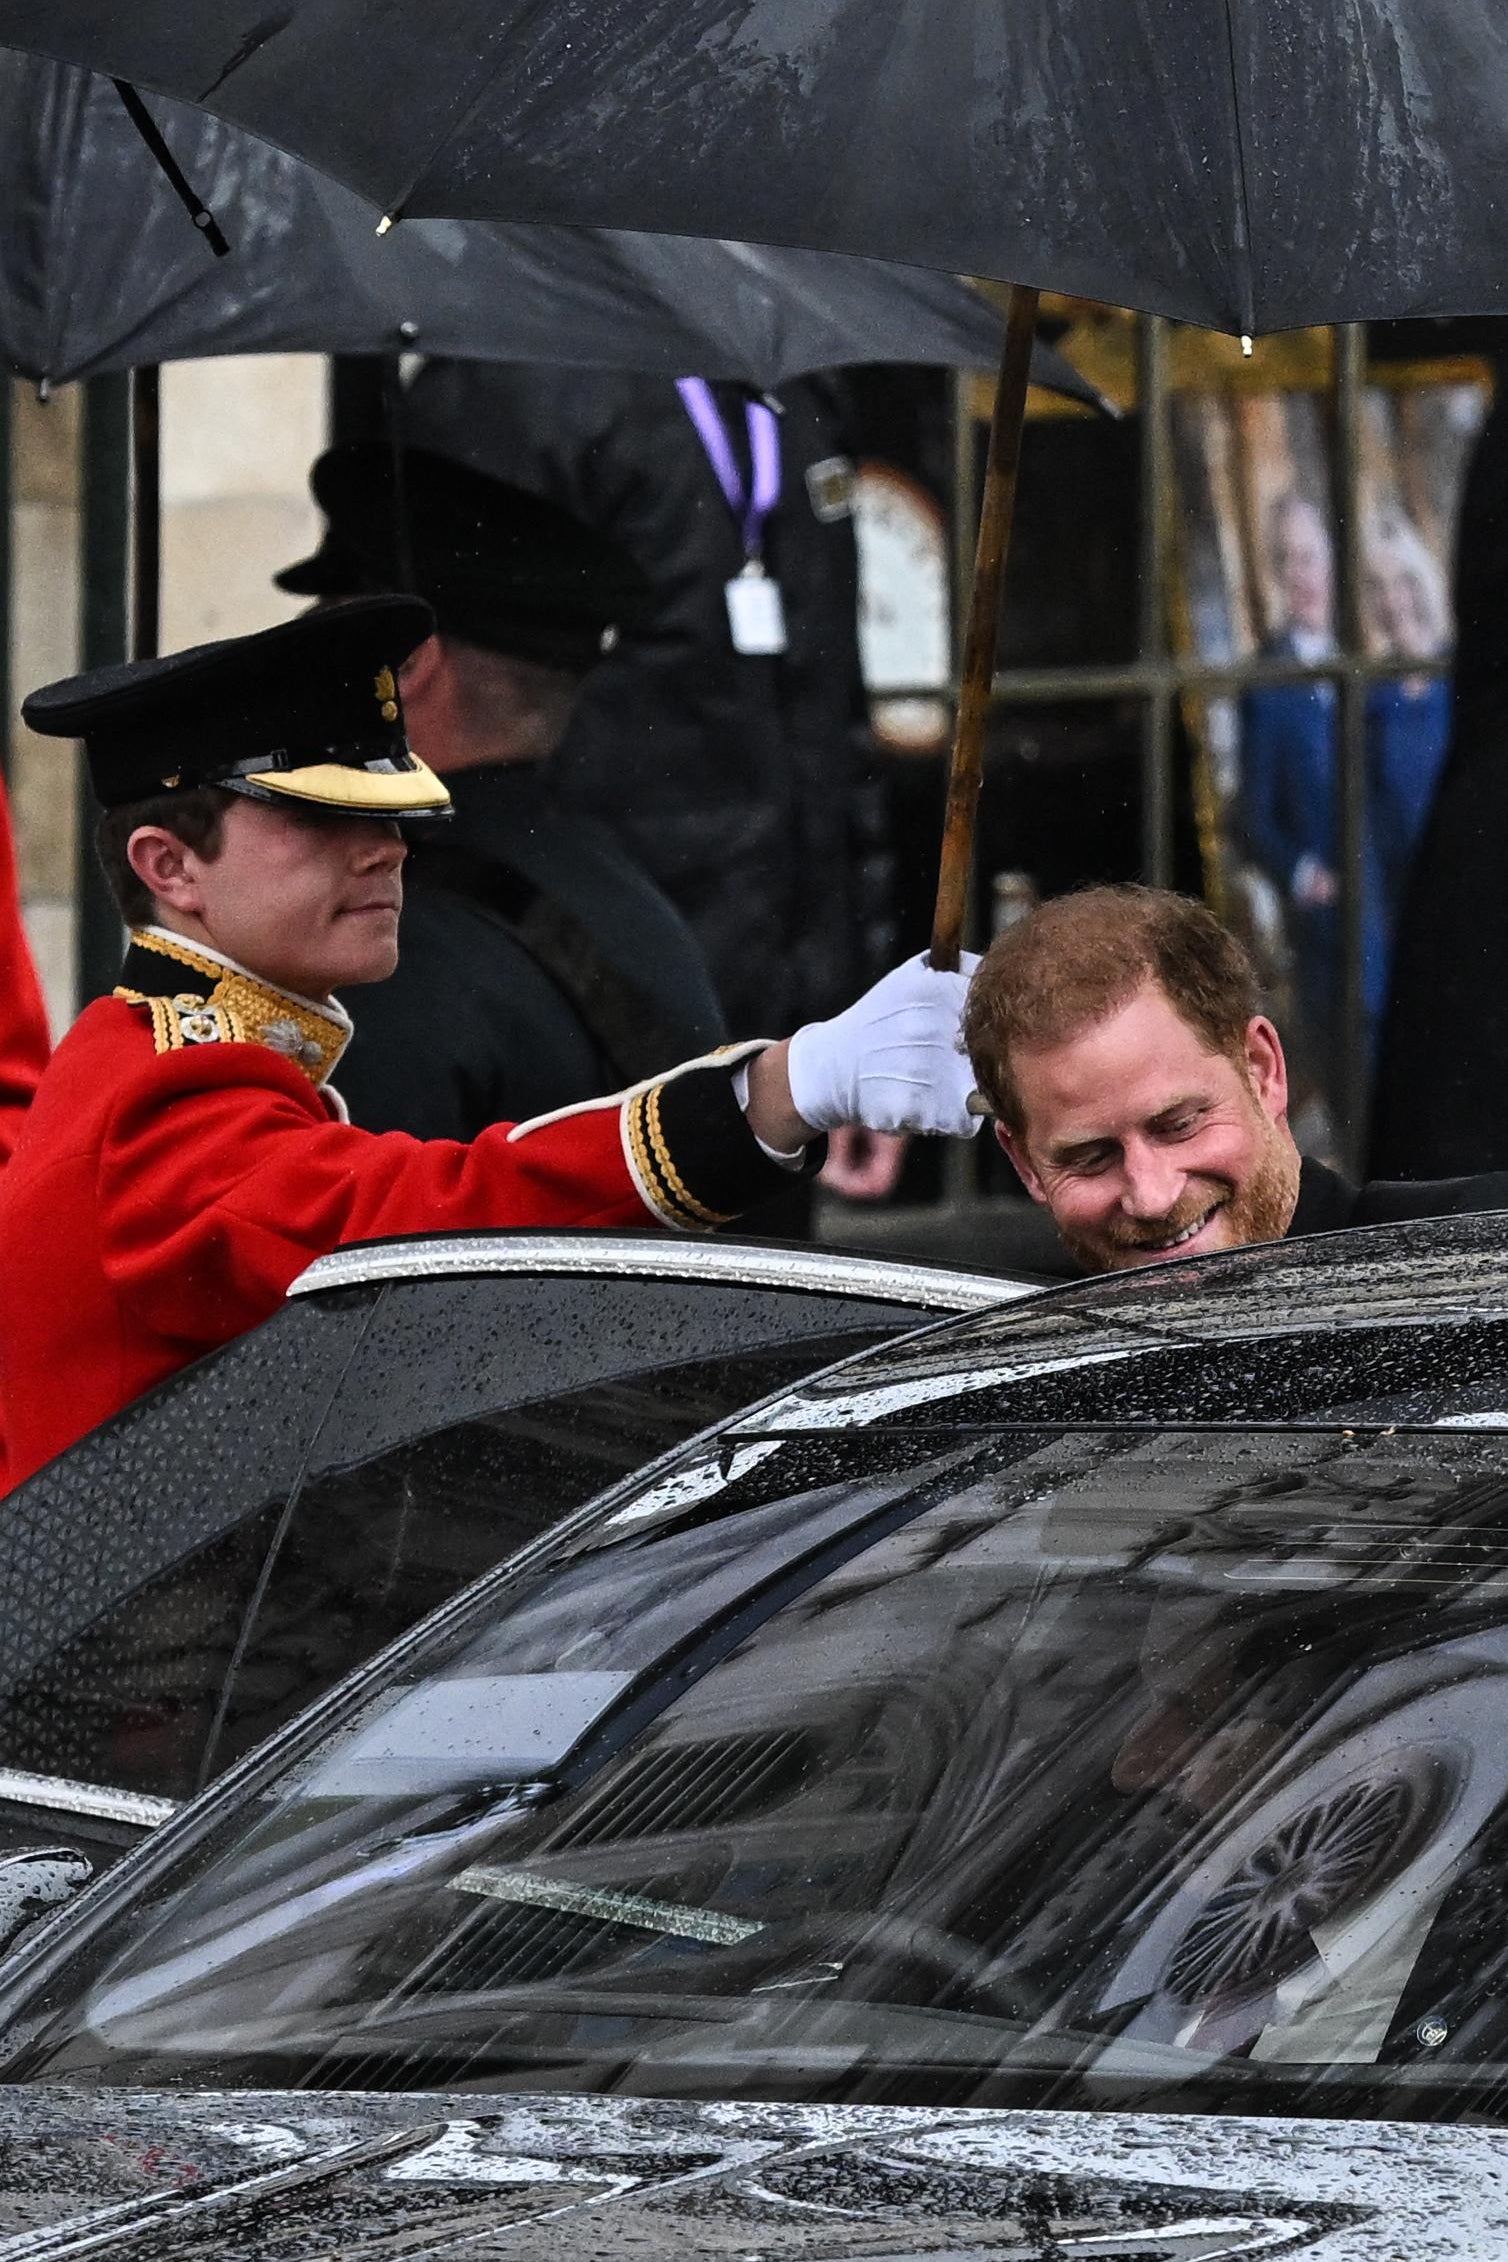 Britain's Prince Harry, Duke of Sussex leaves Westminster Abbey after the Coronation Ceremonies of Britain's King Charles III and Britain's Queen Camilla in central London on May 6, 2023. - The set-piece coronation is the first in Britain in 70 years, and only the second in history to be televised. Charles will be the 40th reigning monarch to be crowned at the central London church since King William I in 1066. Outside the UK, he is also king of 14 other Commonwealth countries, including Australia, Canada and New Zealand. (Photo by Paul ELLIS / AFP) (Photo by PAUL ELLIS/AFP via Getty Images)